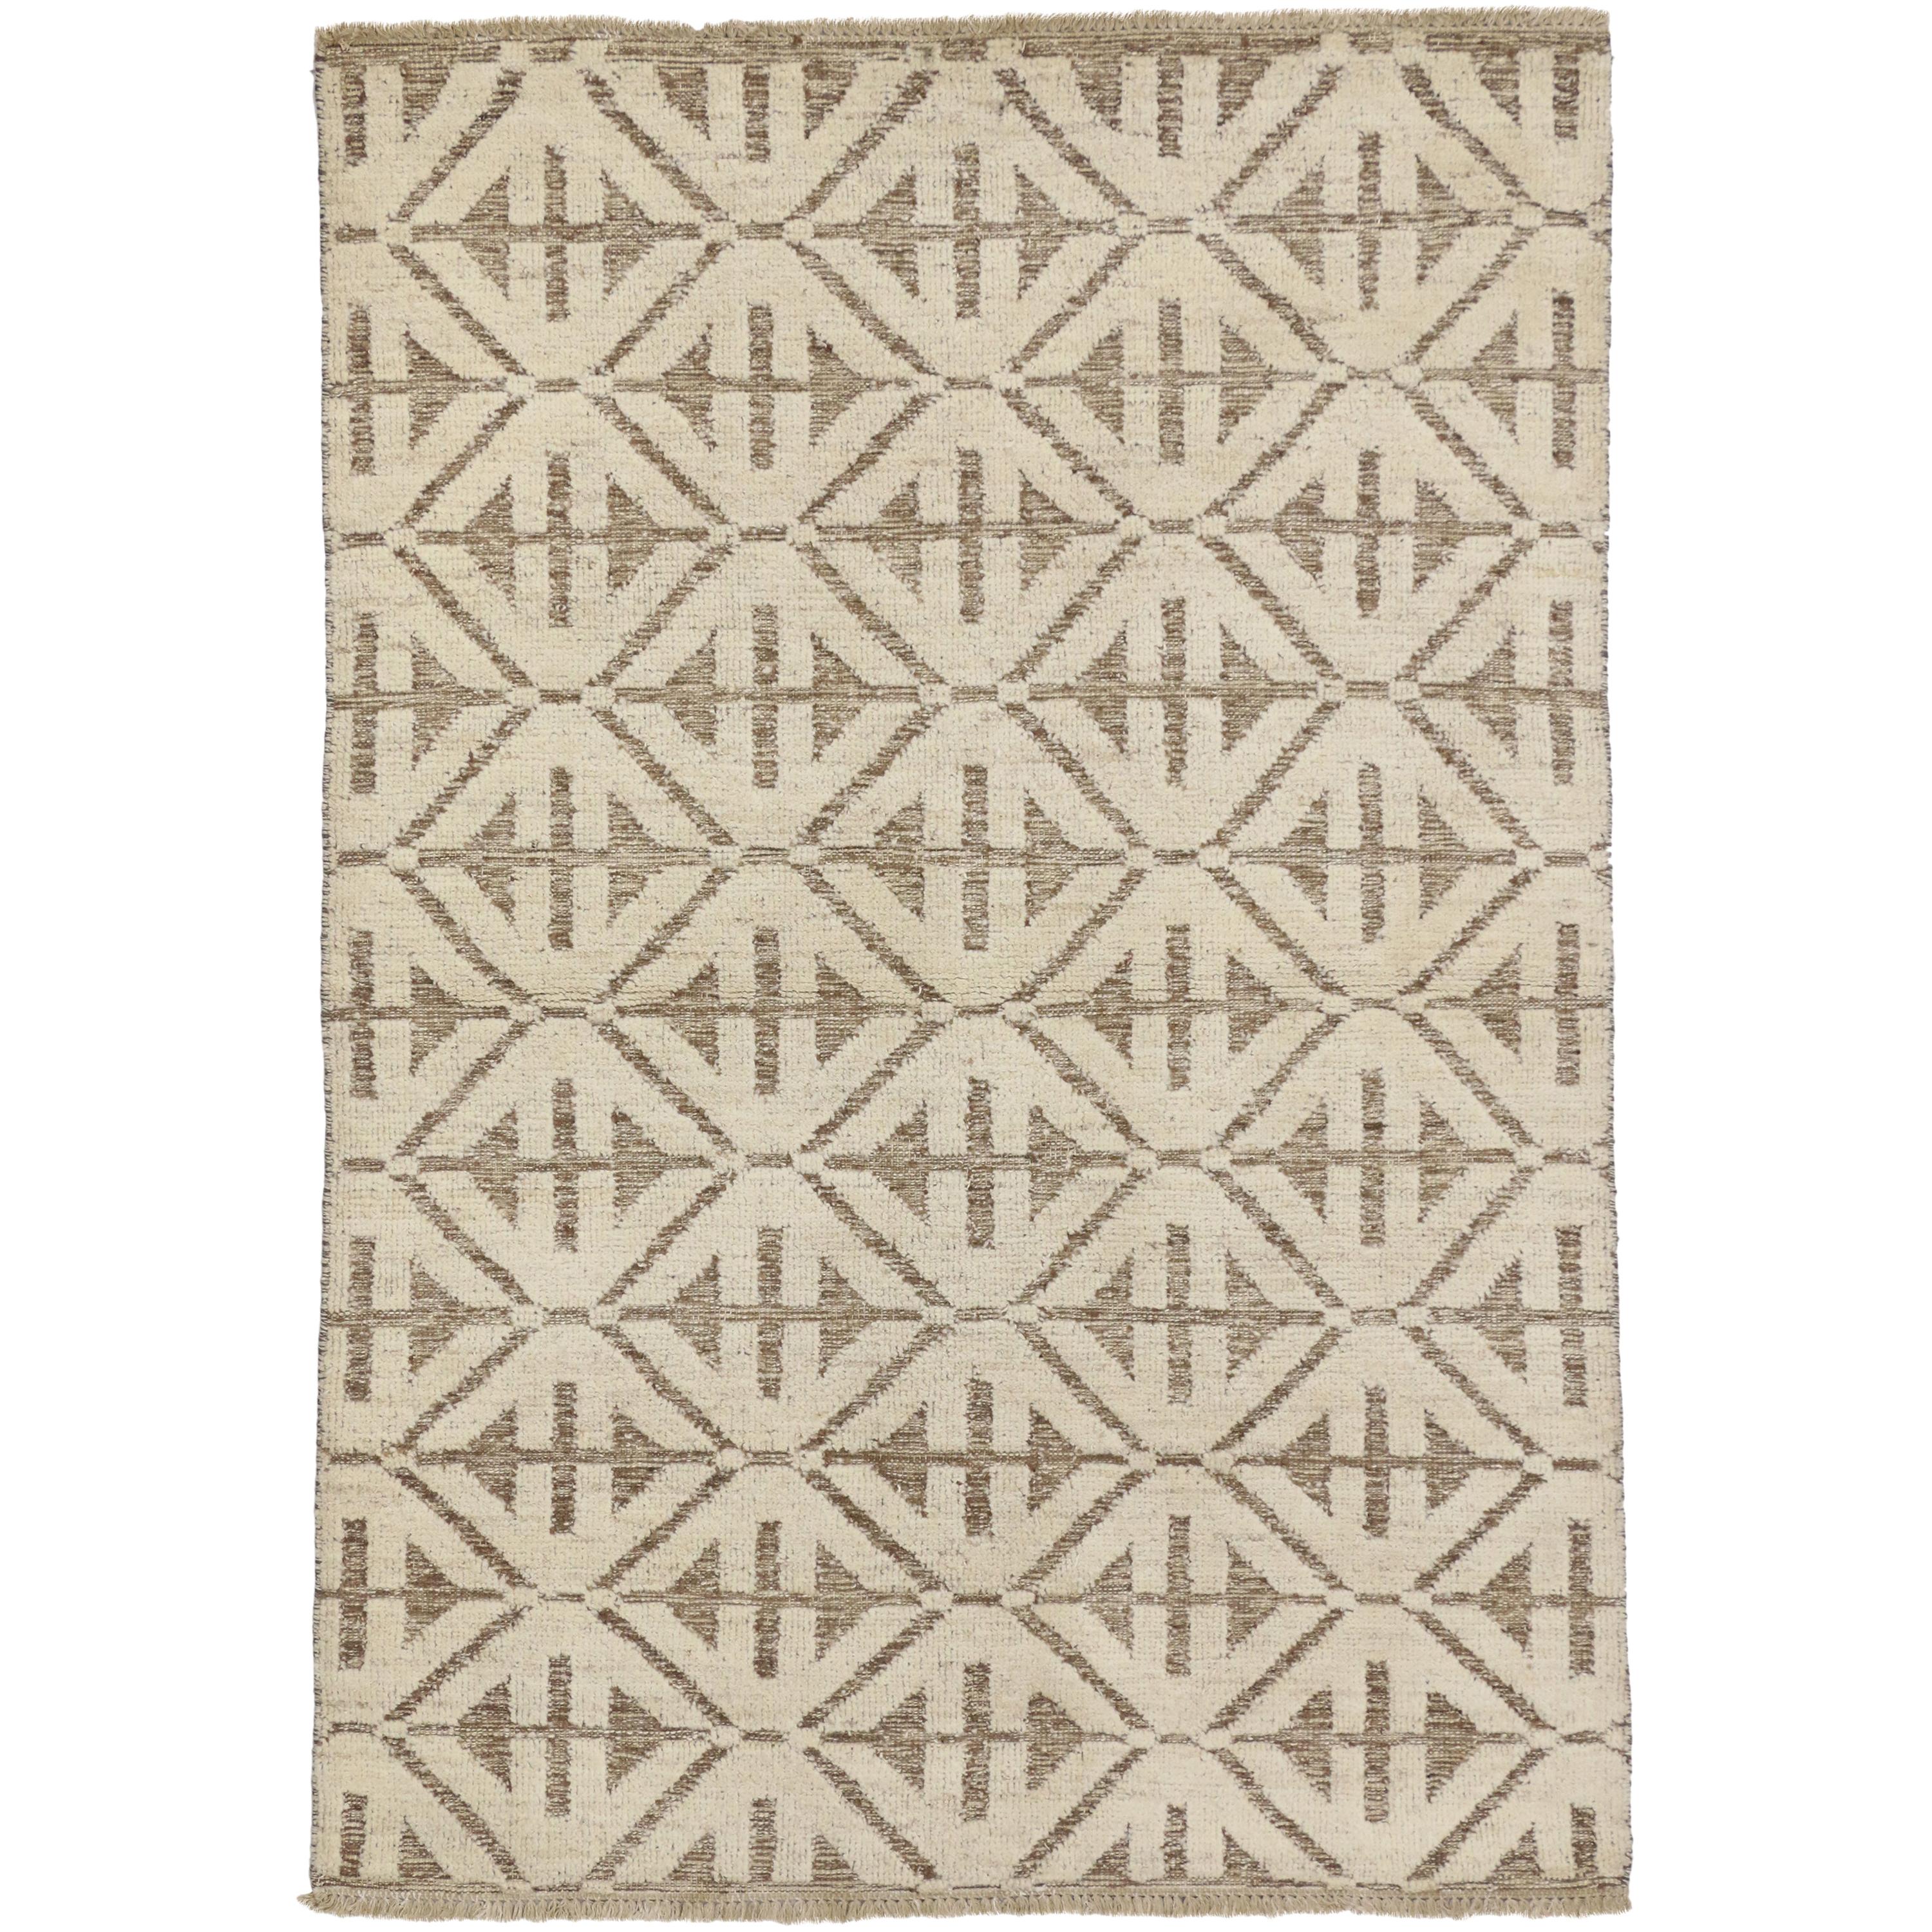 New Contemporary High and Low Texture Area Rug with Mid-Century Modern Style For Sale